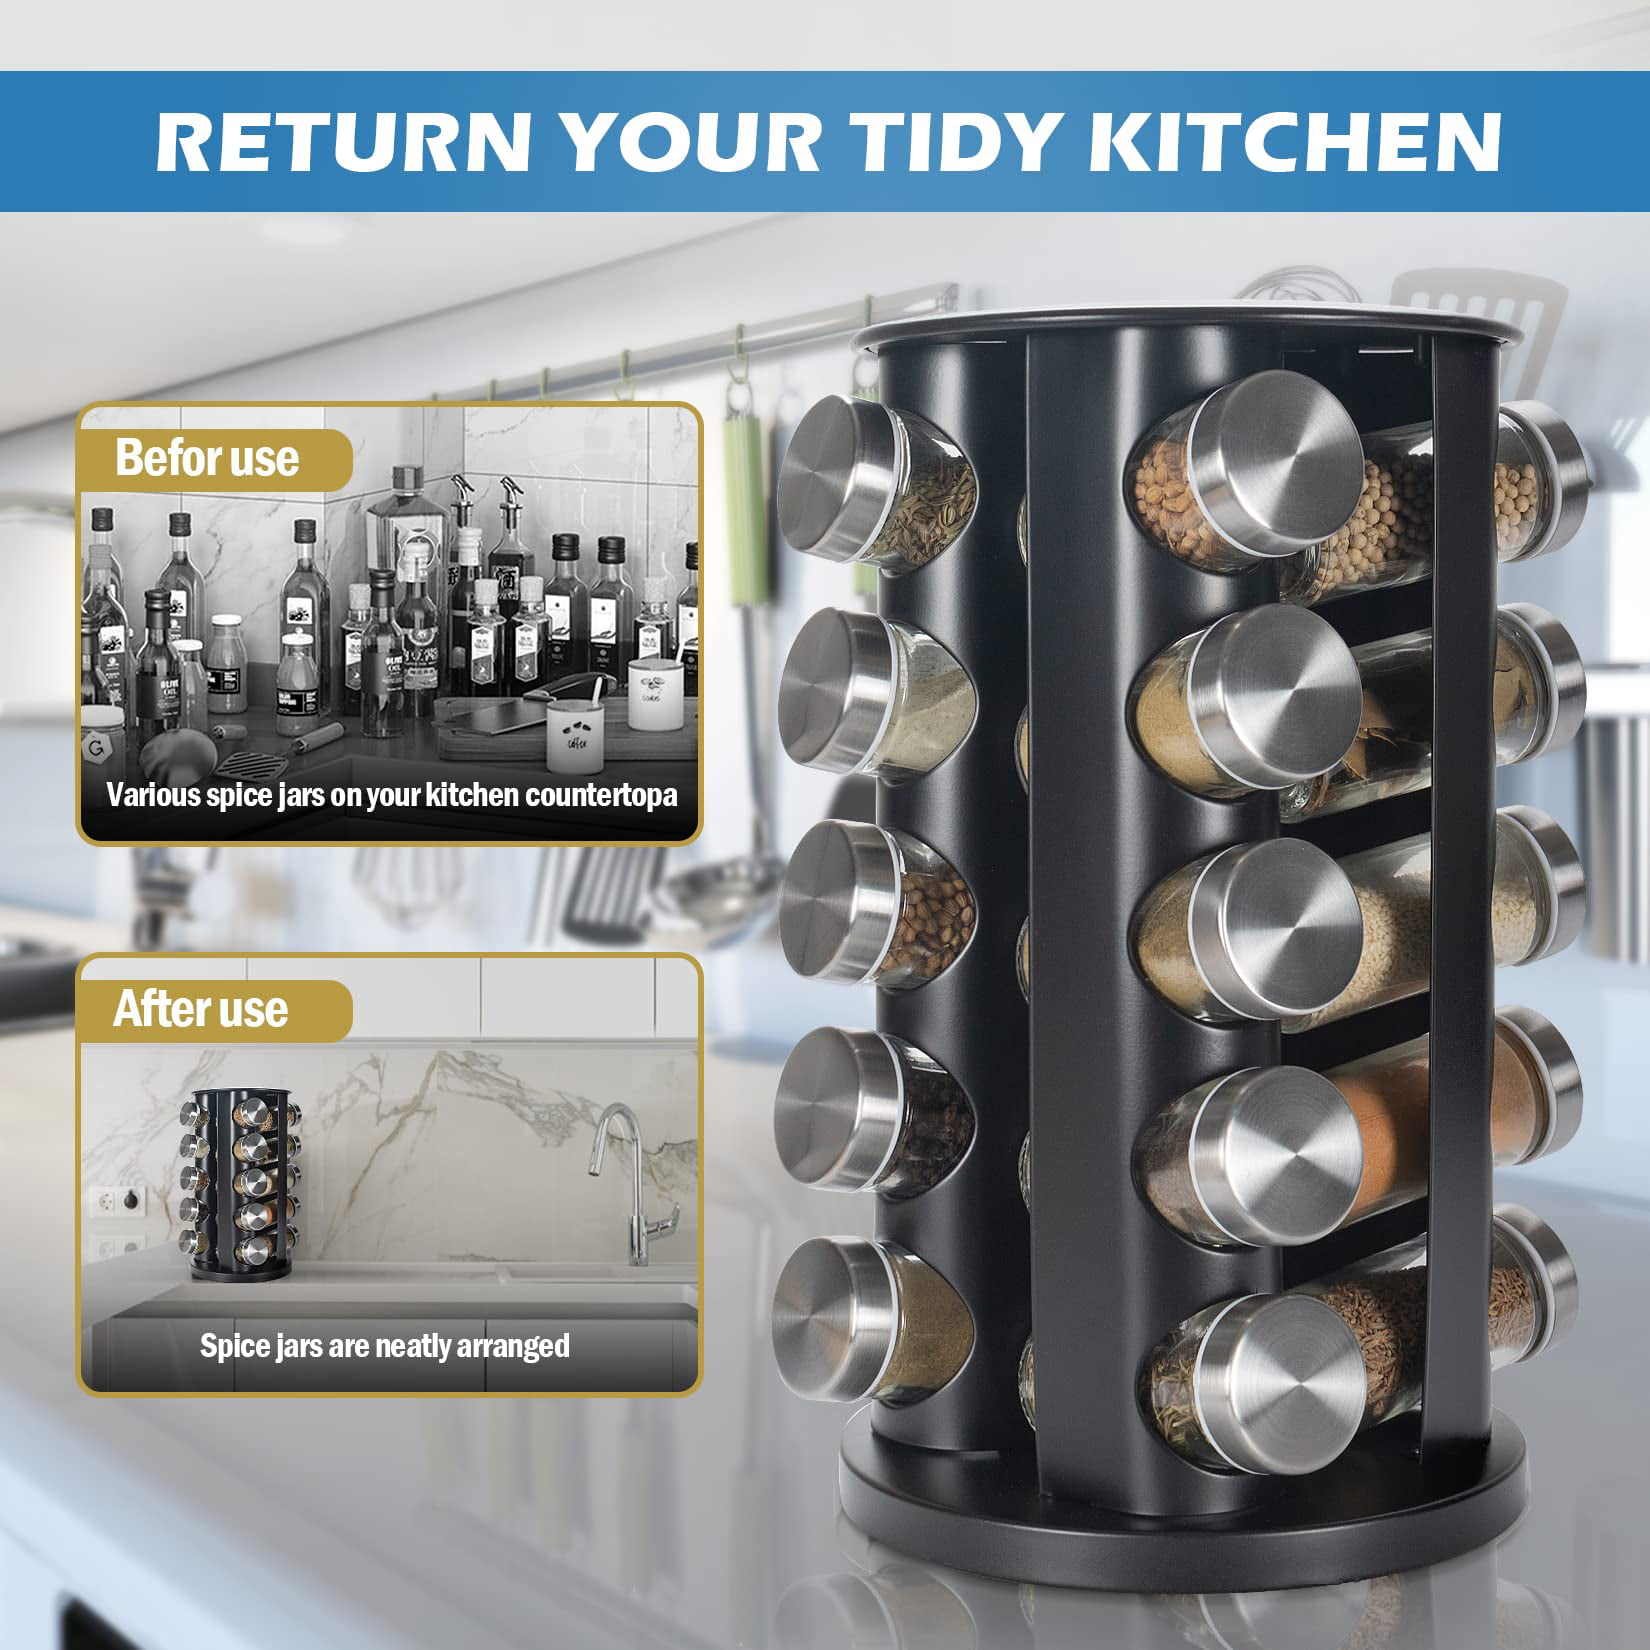 Allrecipes Revolving 20-Jar Spice Rack Tower Organizer with Free Spice  Refills for 5 Years, Brushed Stainless Steel